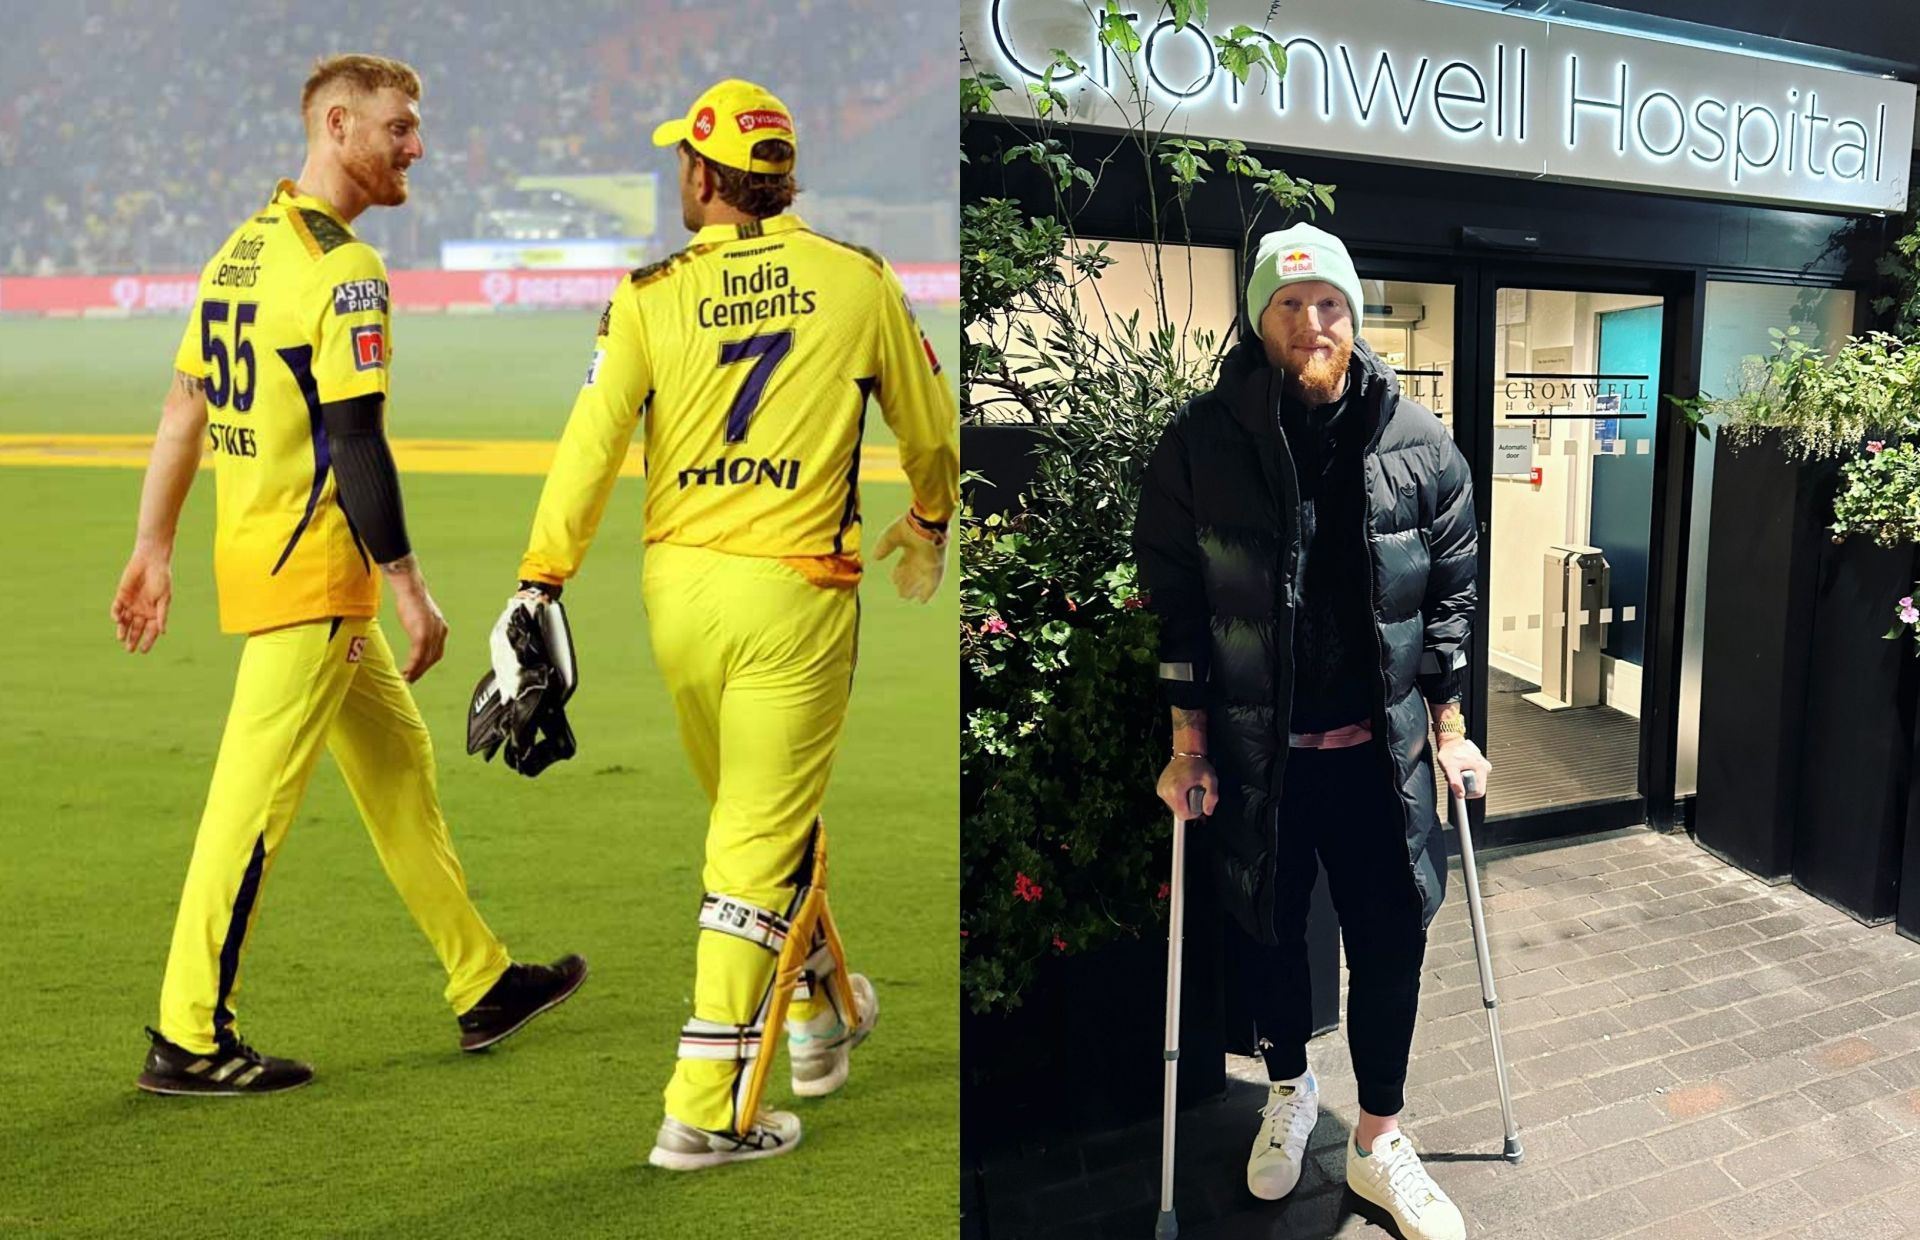 Ben Stokes underwent surgery and started his rehab recently.